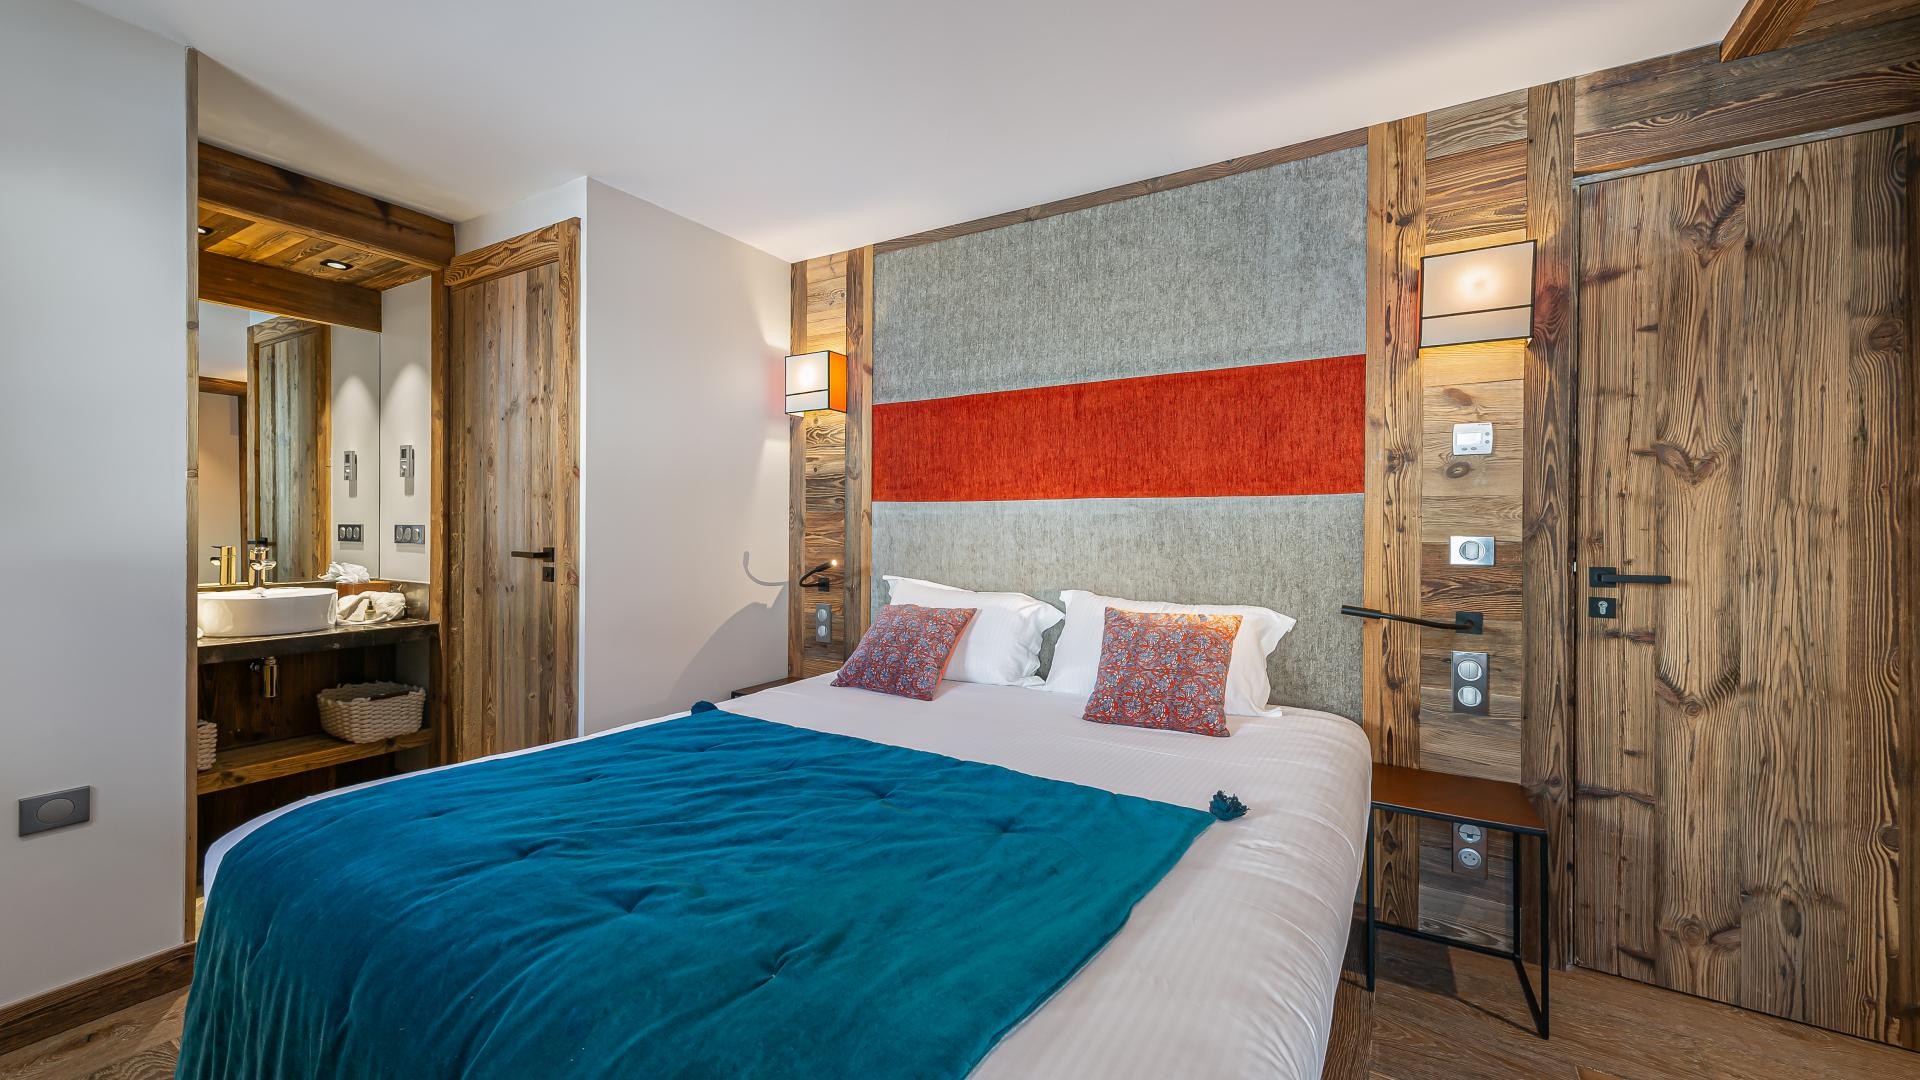 val-d-isere-location-appartement-luxe-varnite